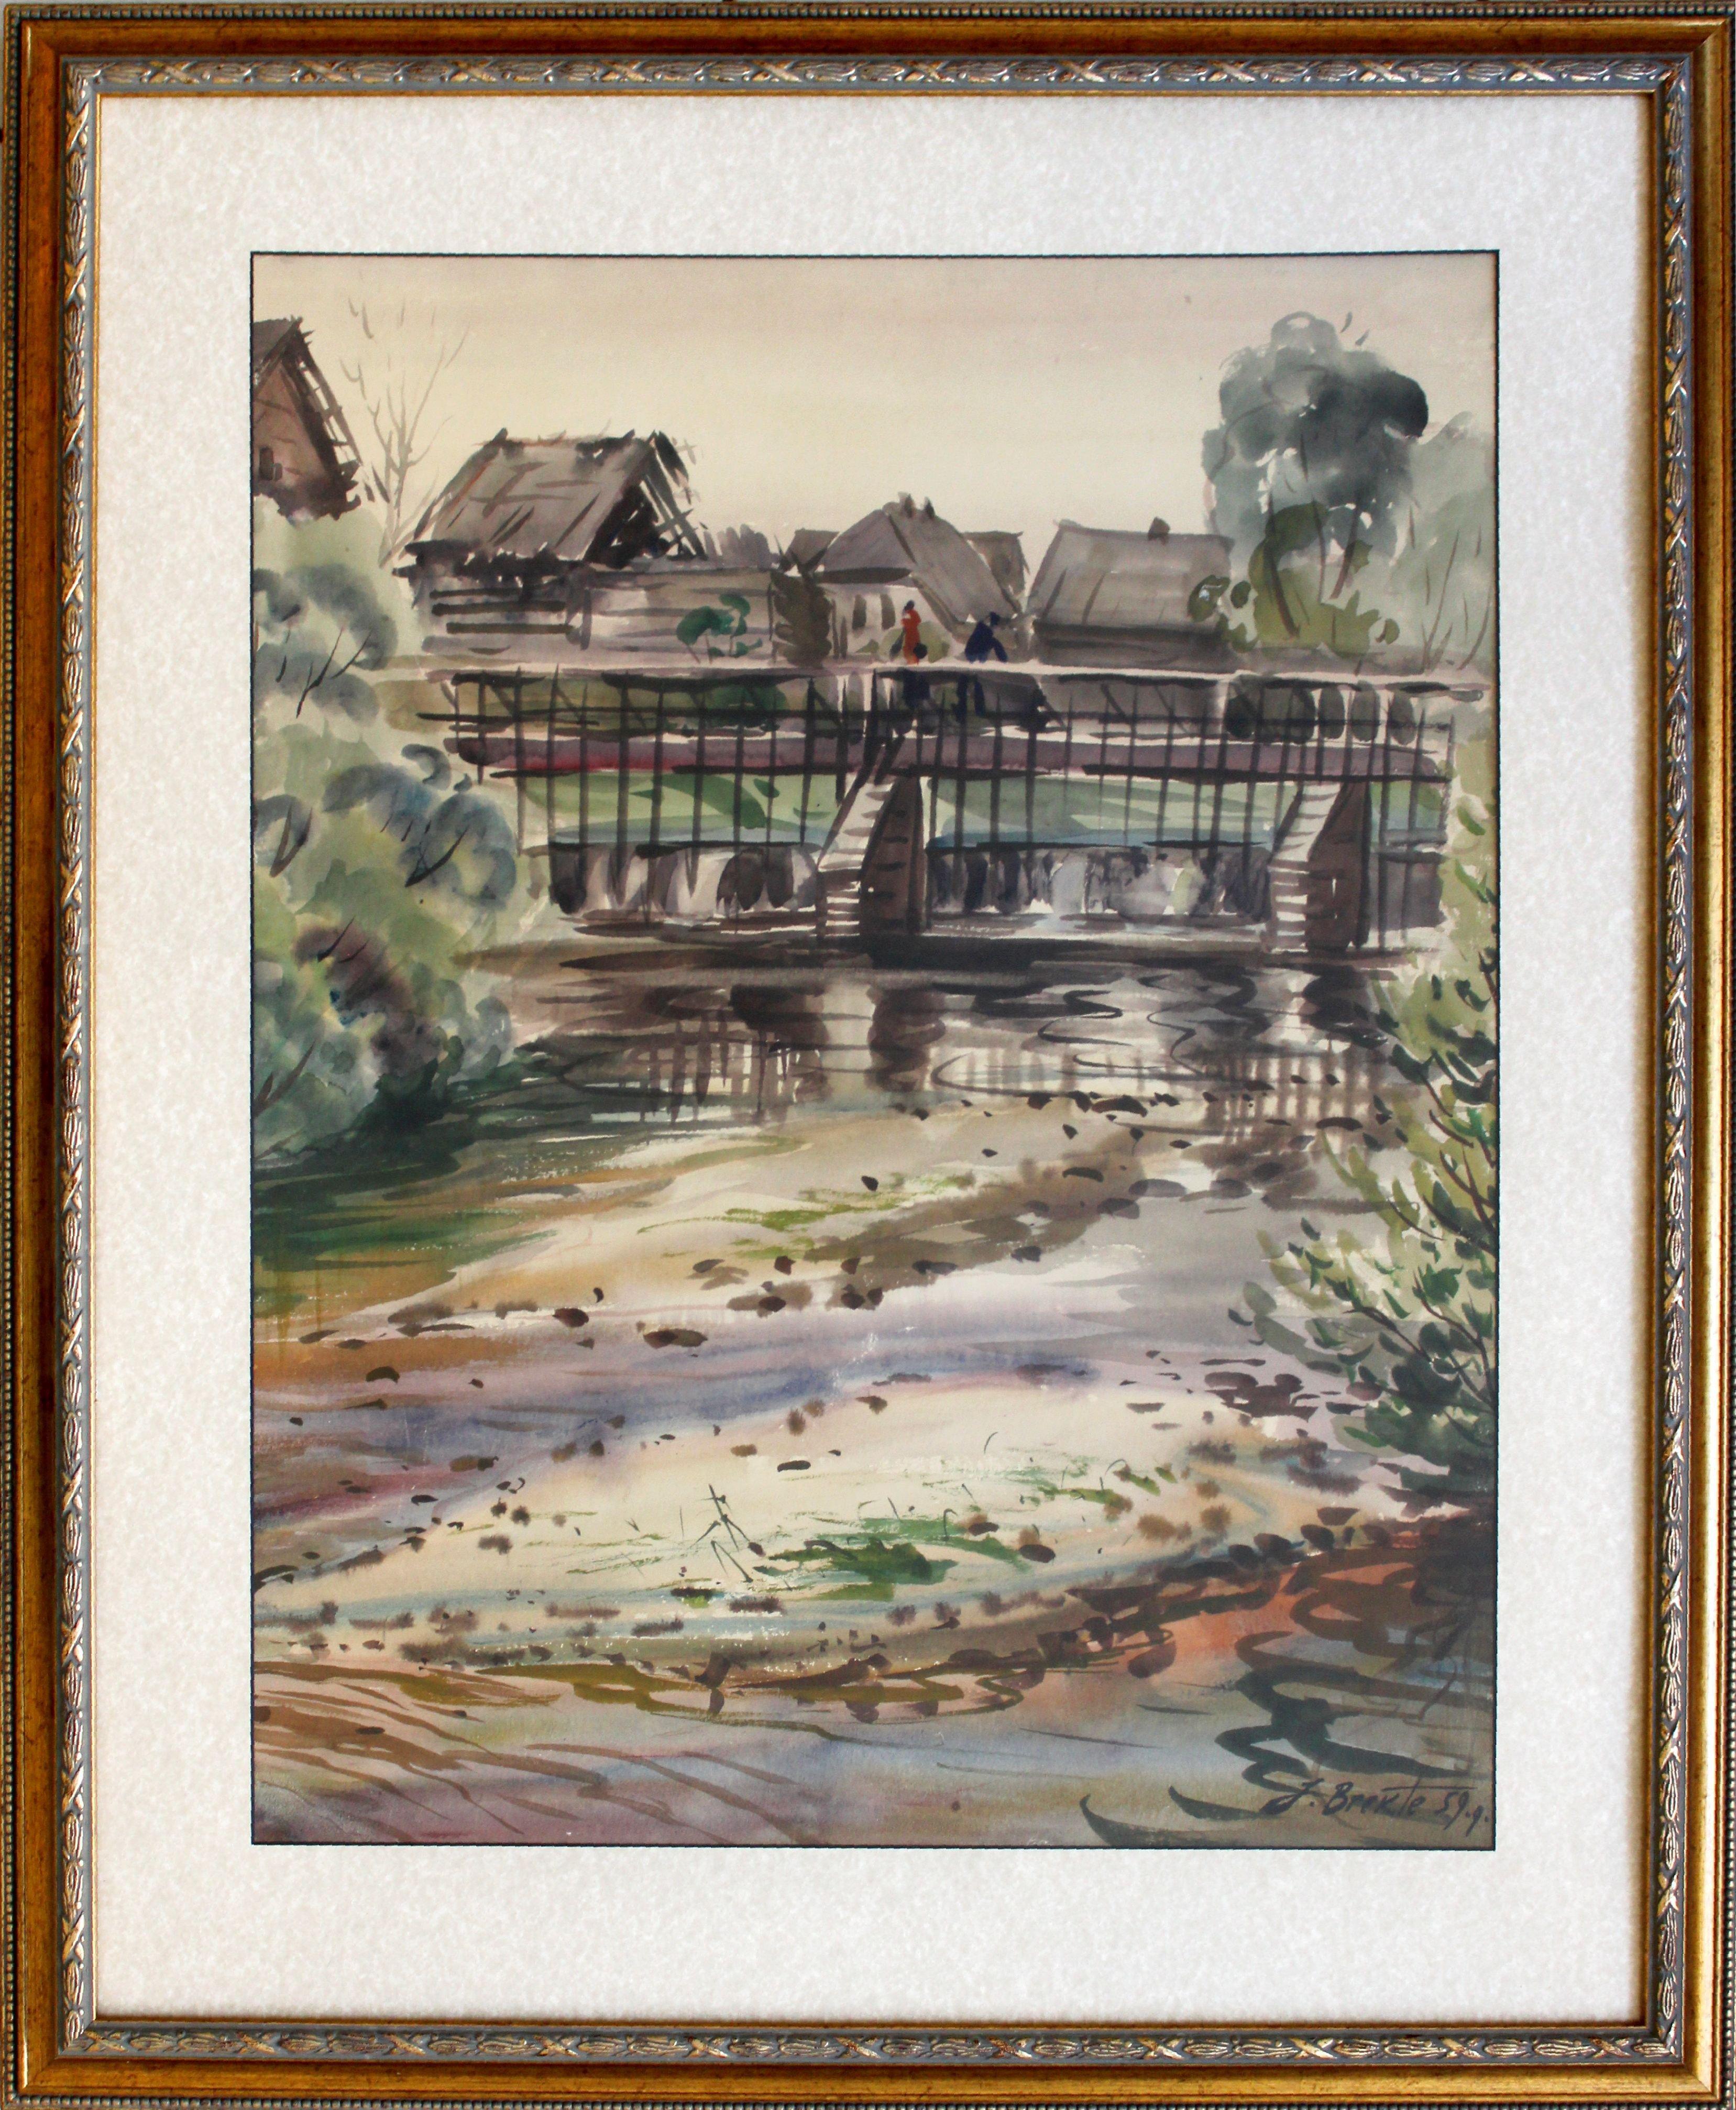 The old dam. 1959, cardboard, watercolor, 68x54 cm - Painting by Janis Brekte